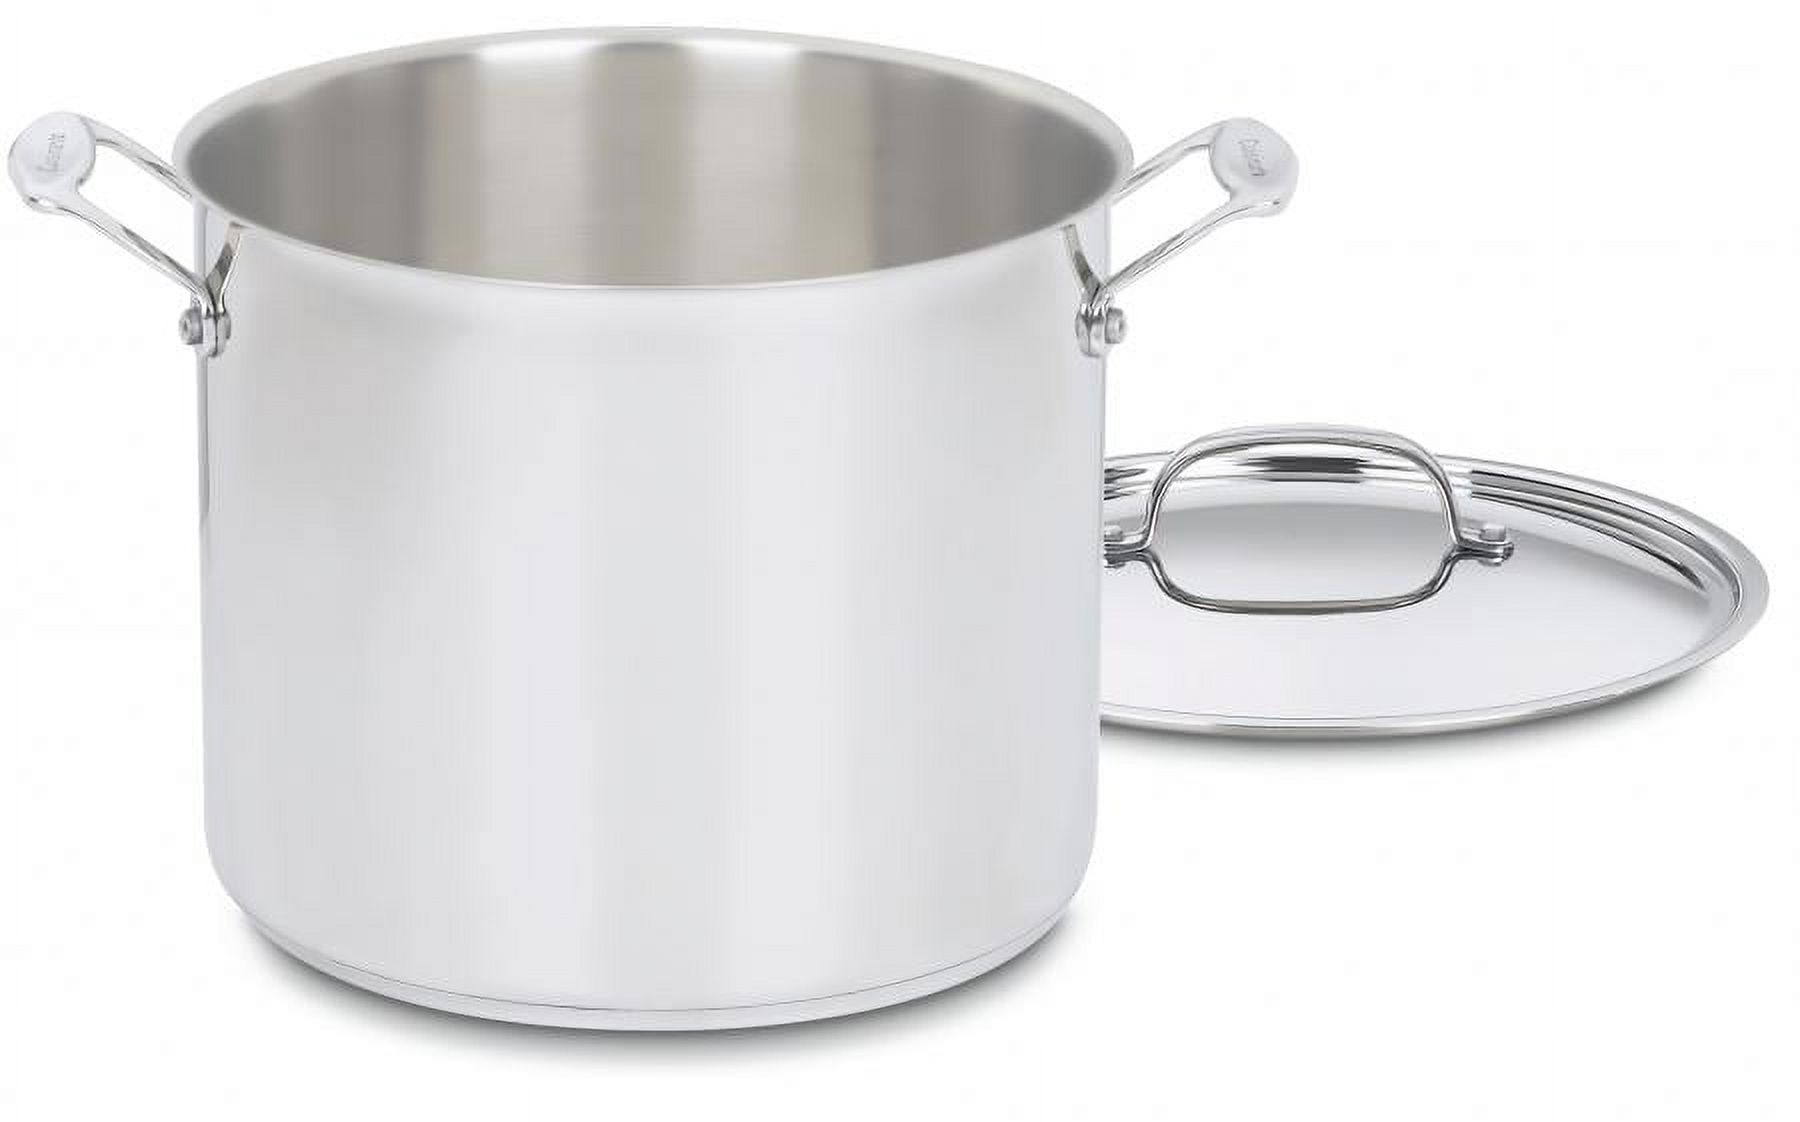 Cuisinart Chef'S Classic Stainless Steel 12 Qt. Stockpot W/Cover - image 1 of 2